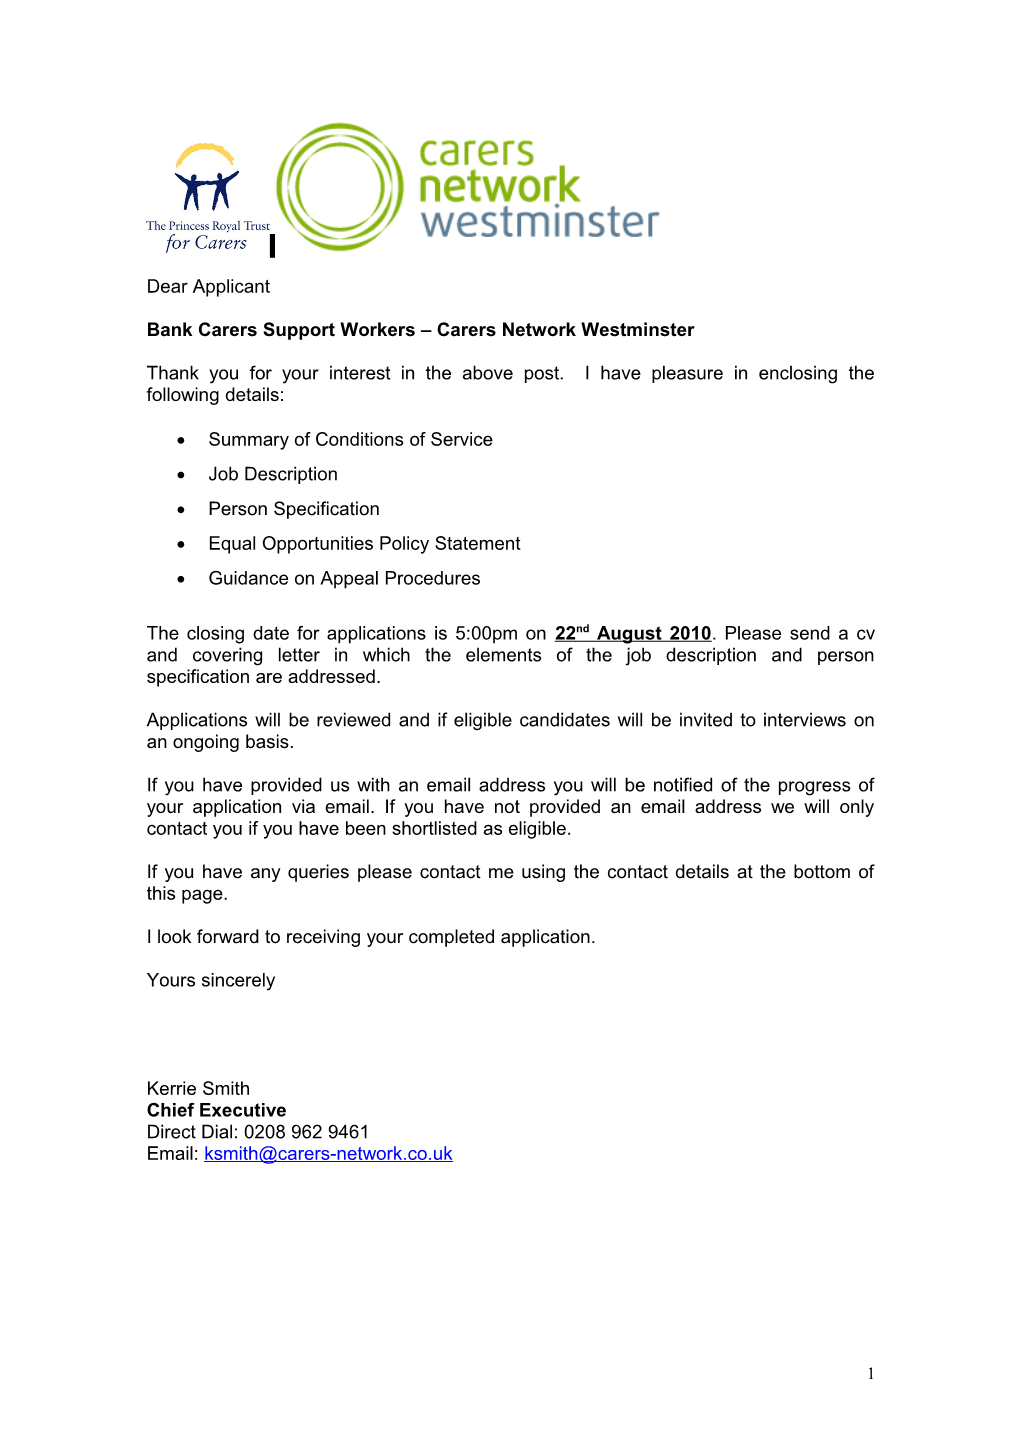 Bank Carers Support Workers Carers Network Westminster